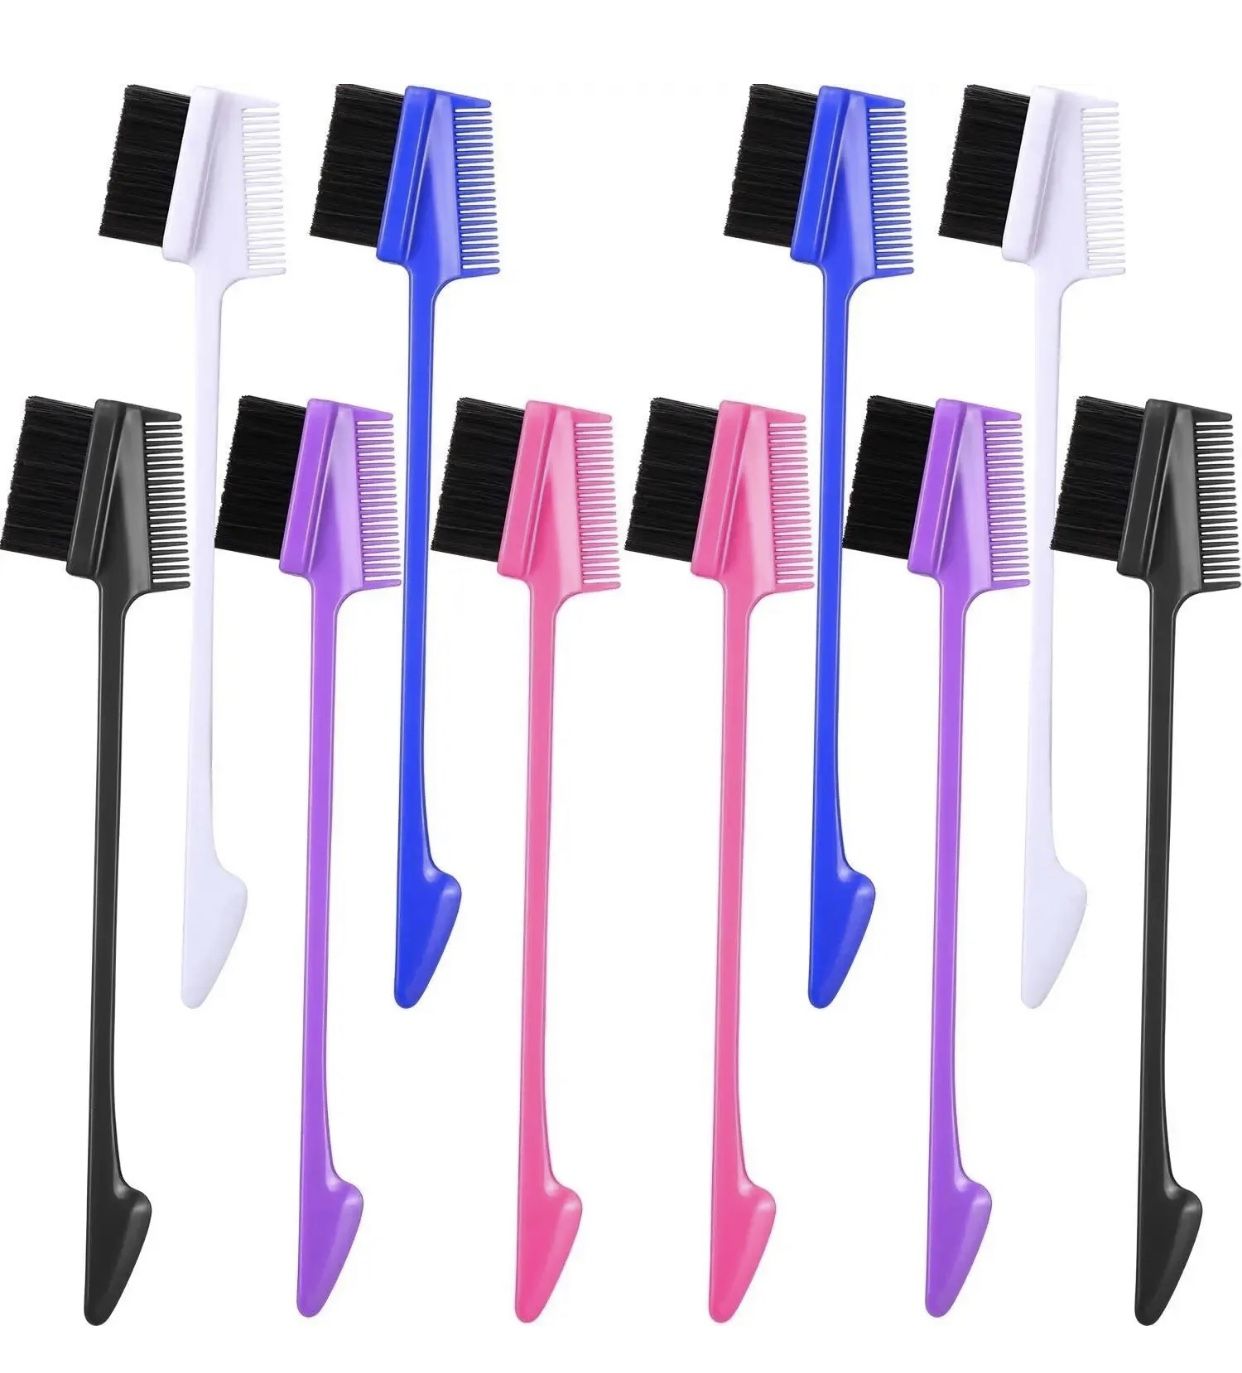 All In One Baby Hair Brushes With Comb And Glue Applicator $3 Each 